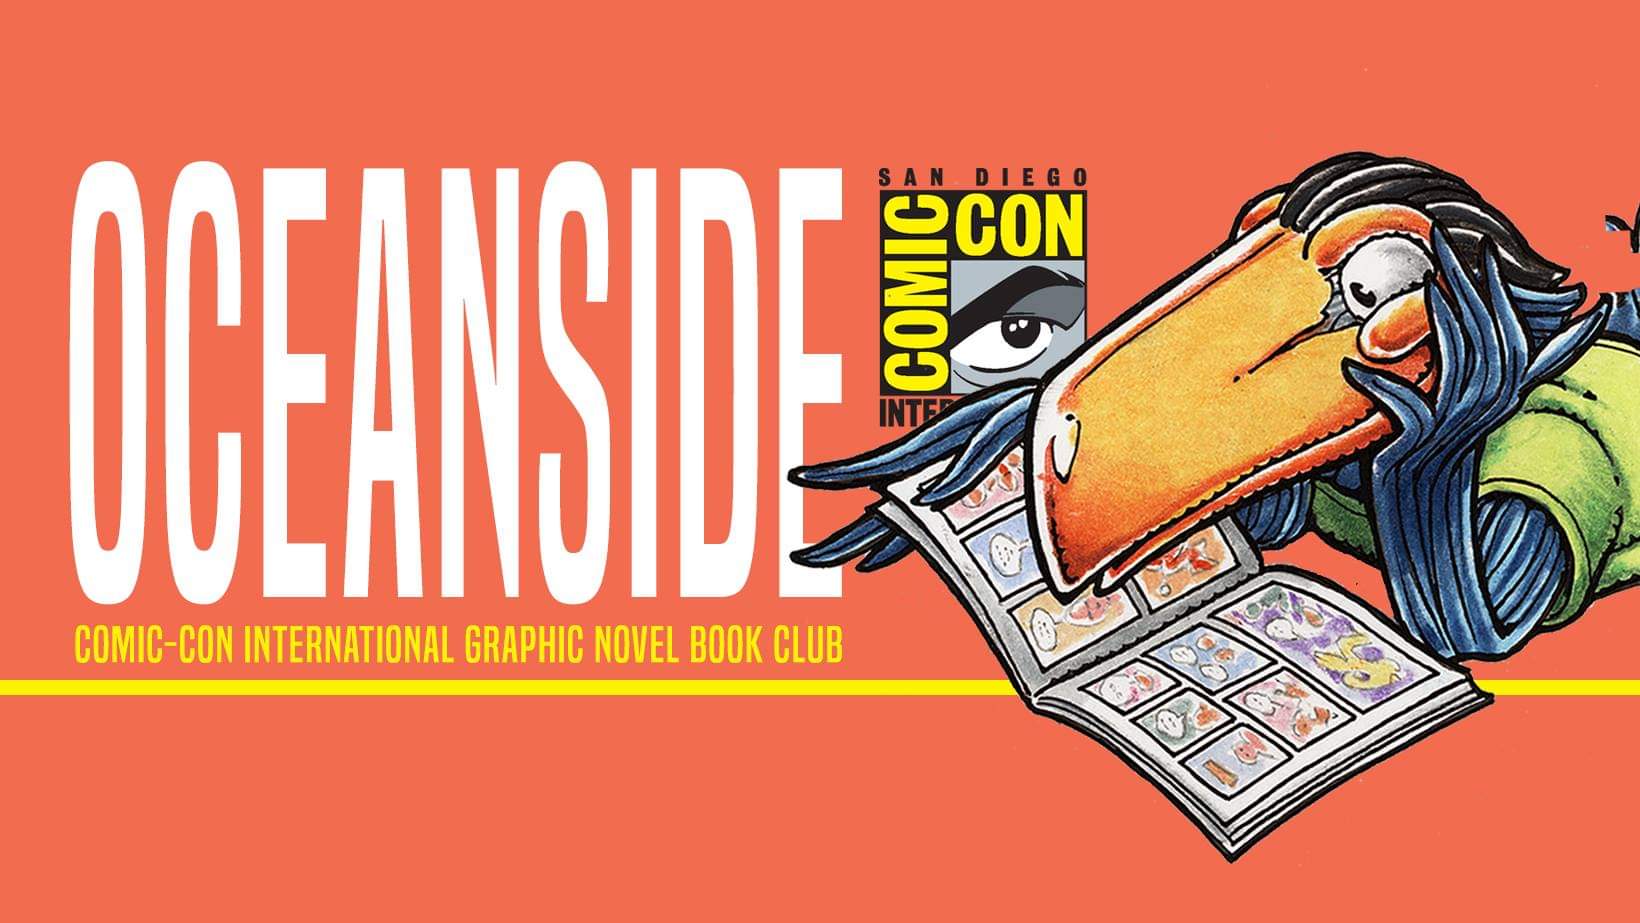 Orange background with the San Diego Comic-Con logo and toucan mascot